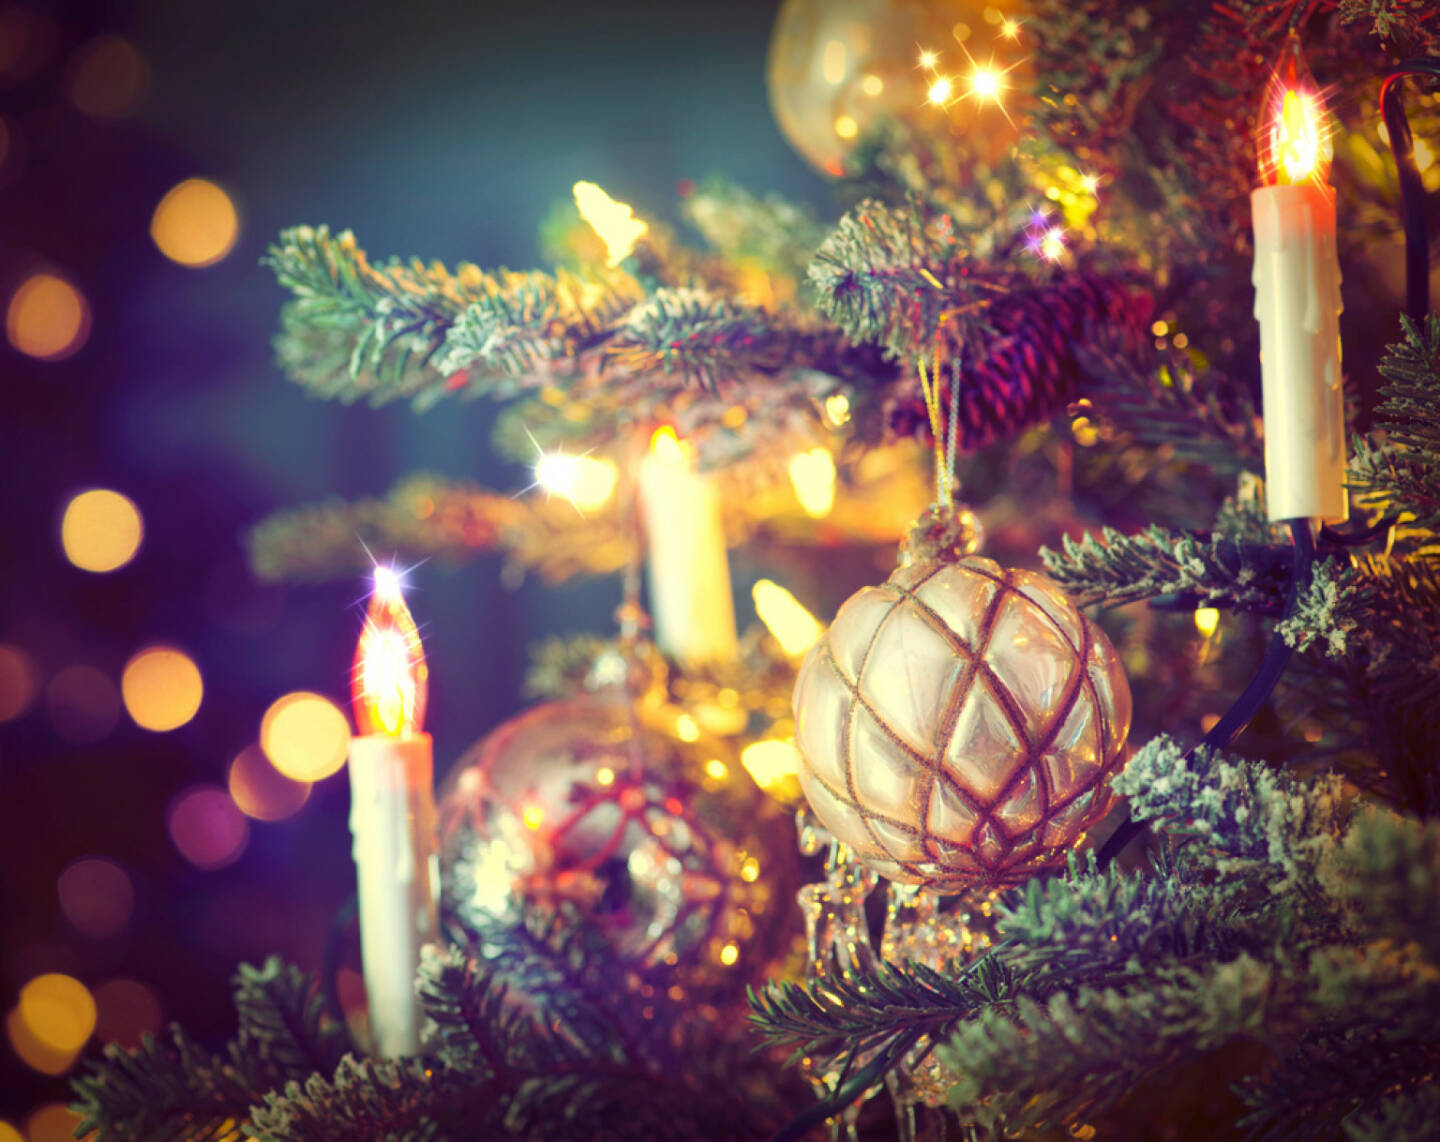 Christbaum, Weihnachten, Weihnachtsbaum, Kerzen, http://www.shutterstock.com/de/pic-165318218/stock-photo-christmas-tree-decorated-with-baubles-garlands-and-candles-retro-style-vintage-styled.html